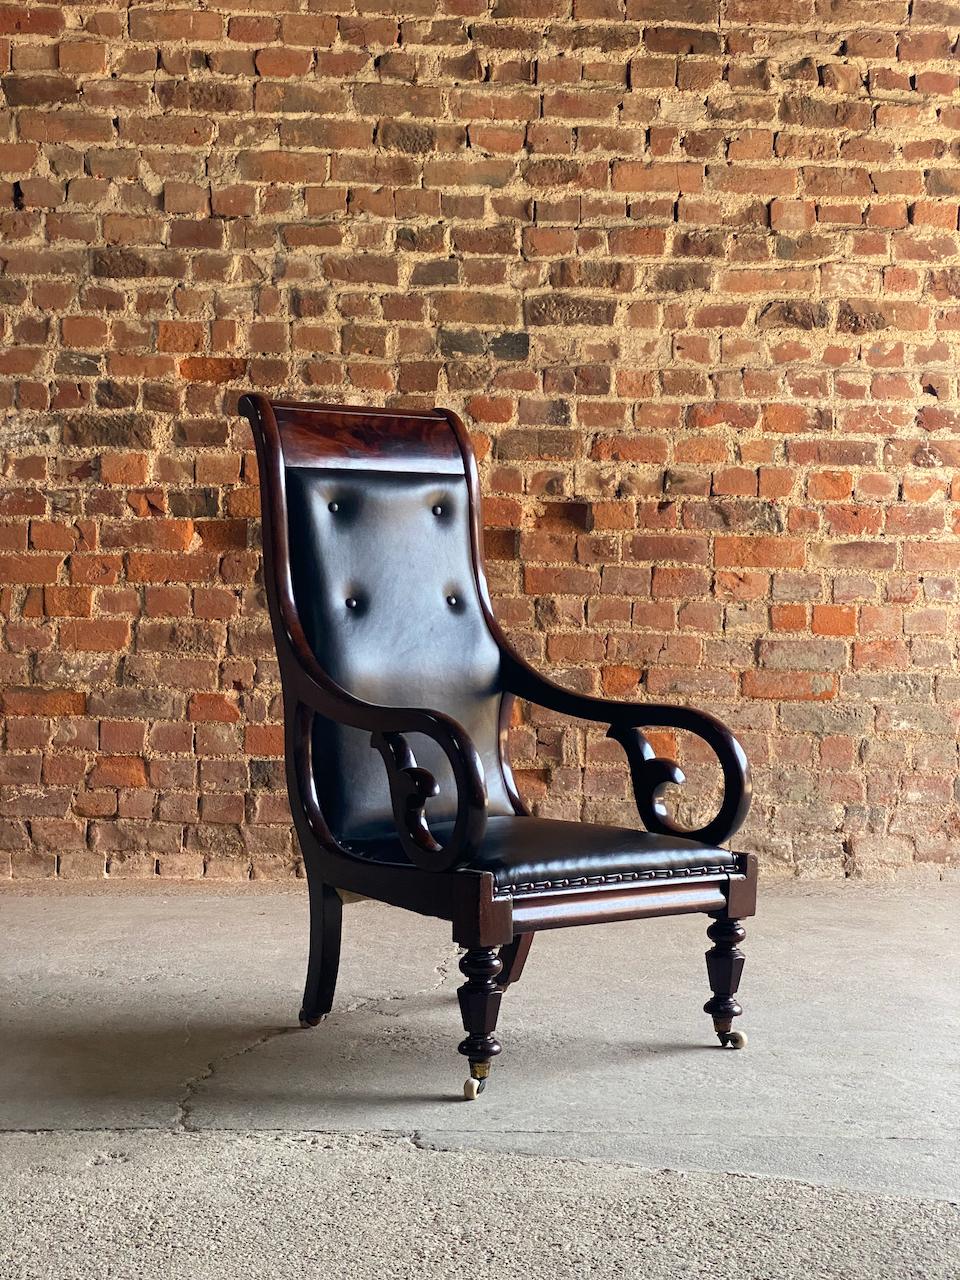 Antique William IV mahogany library armchair Circa 1835.

Magnificent antique 19th century William VI Mahogany framed Library Armchair England circa 1835, the chair newly upholstered in black leather and finished with brass stud detail, with